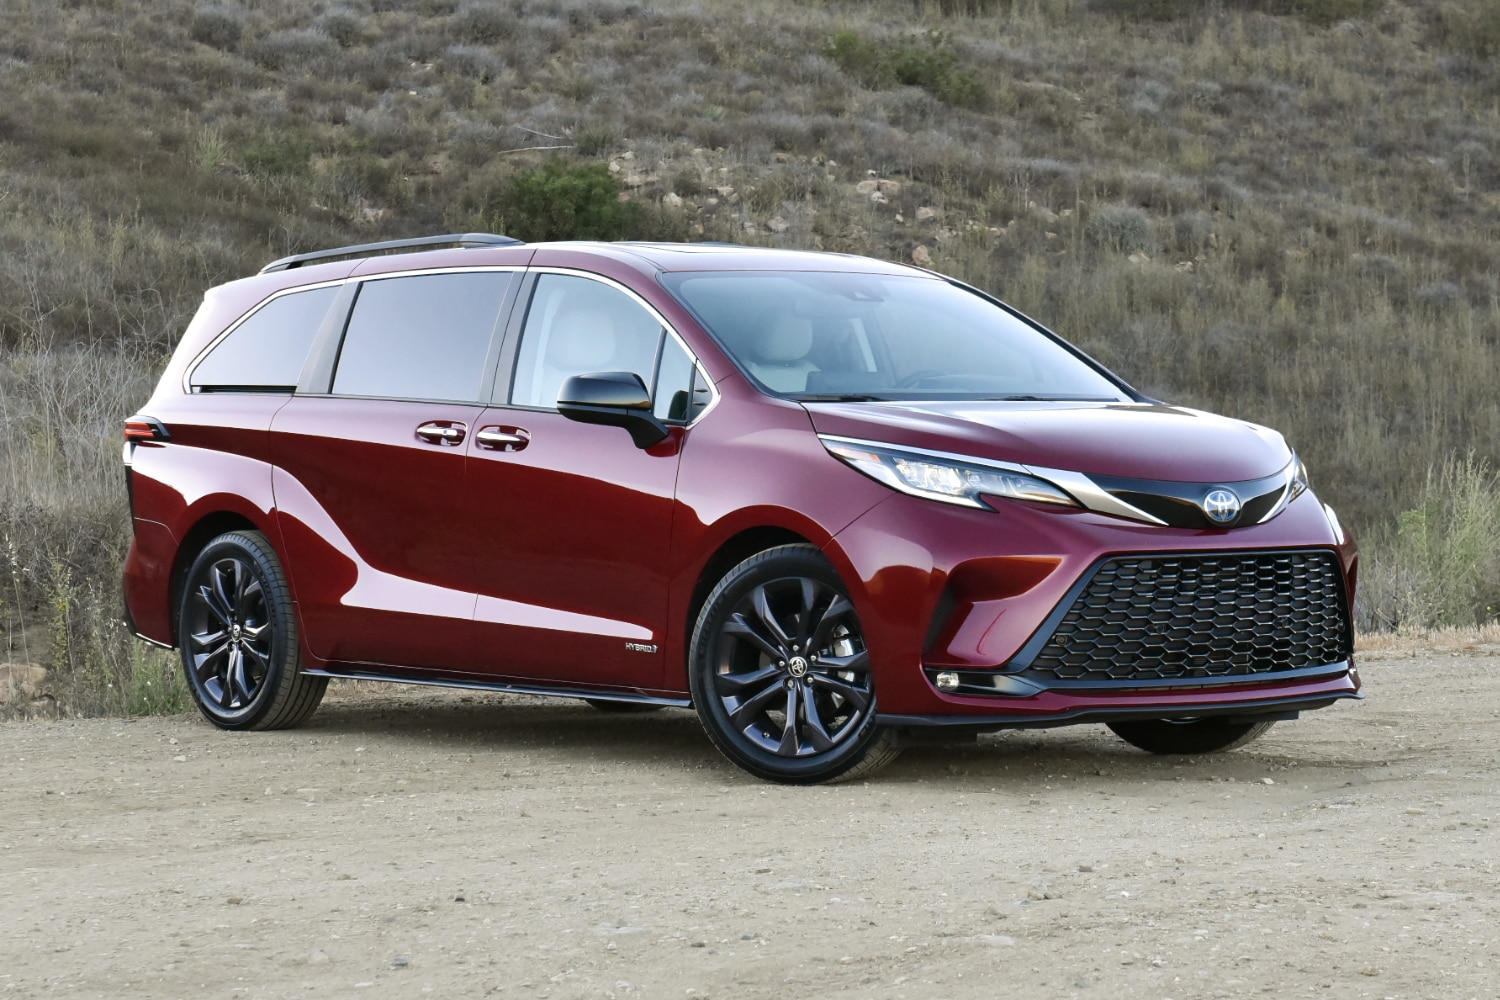 2021 Toyota Sienna Review: Democratizing Fuel Efficiency for Families